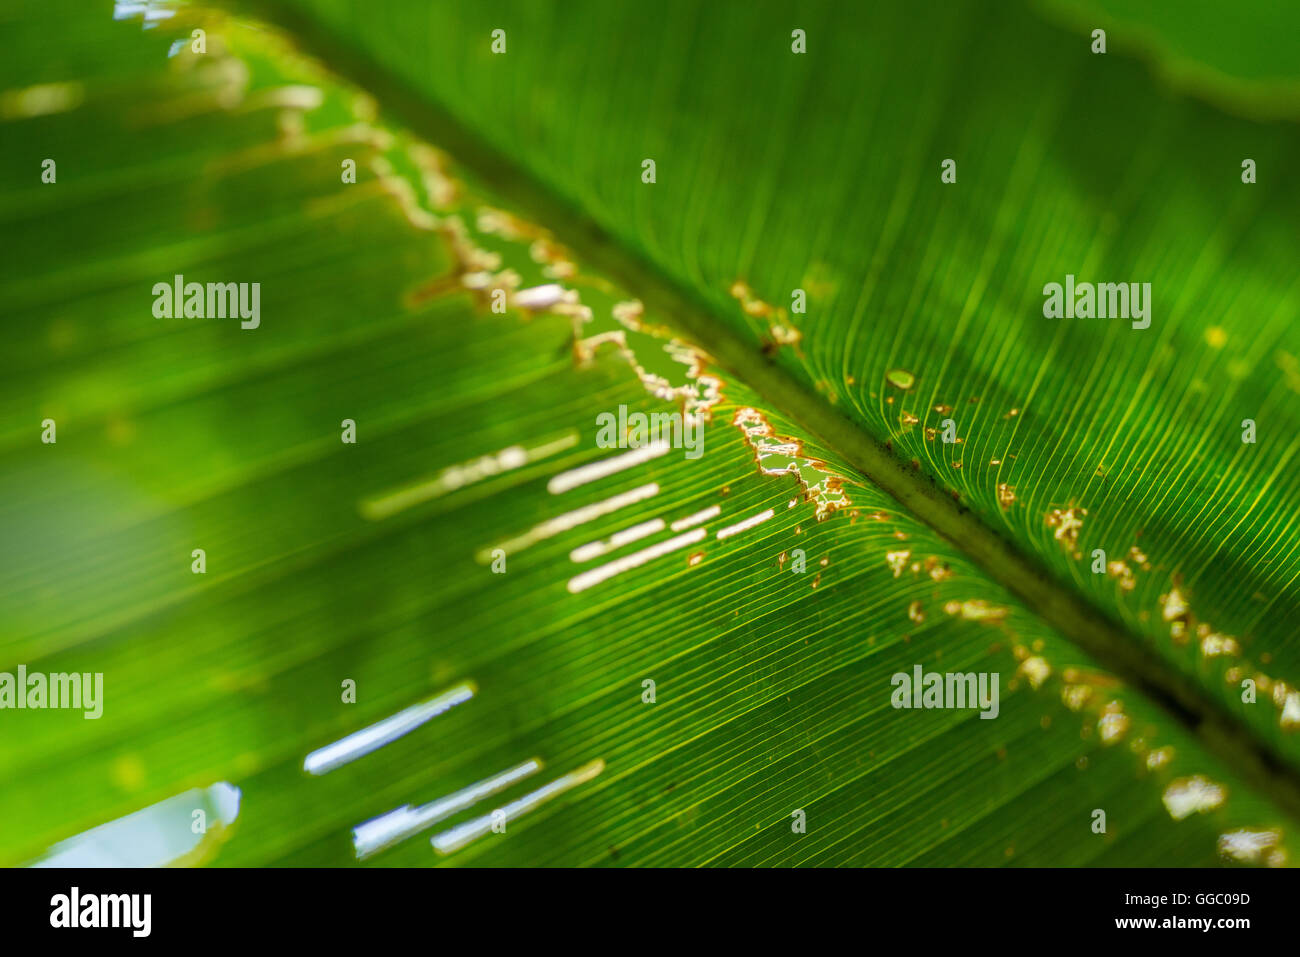 Plant leaf with holes on it Stock Photo